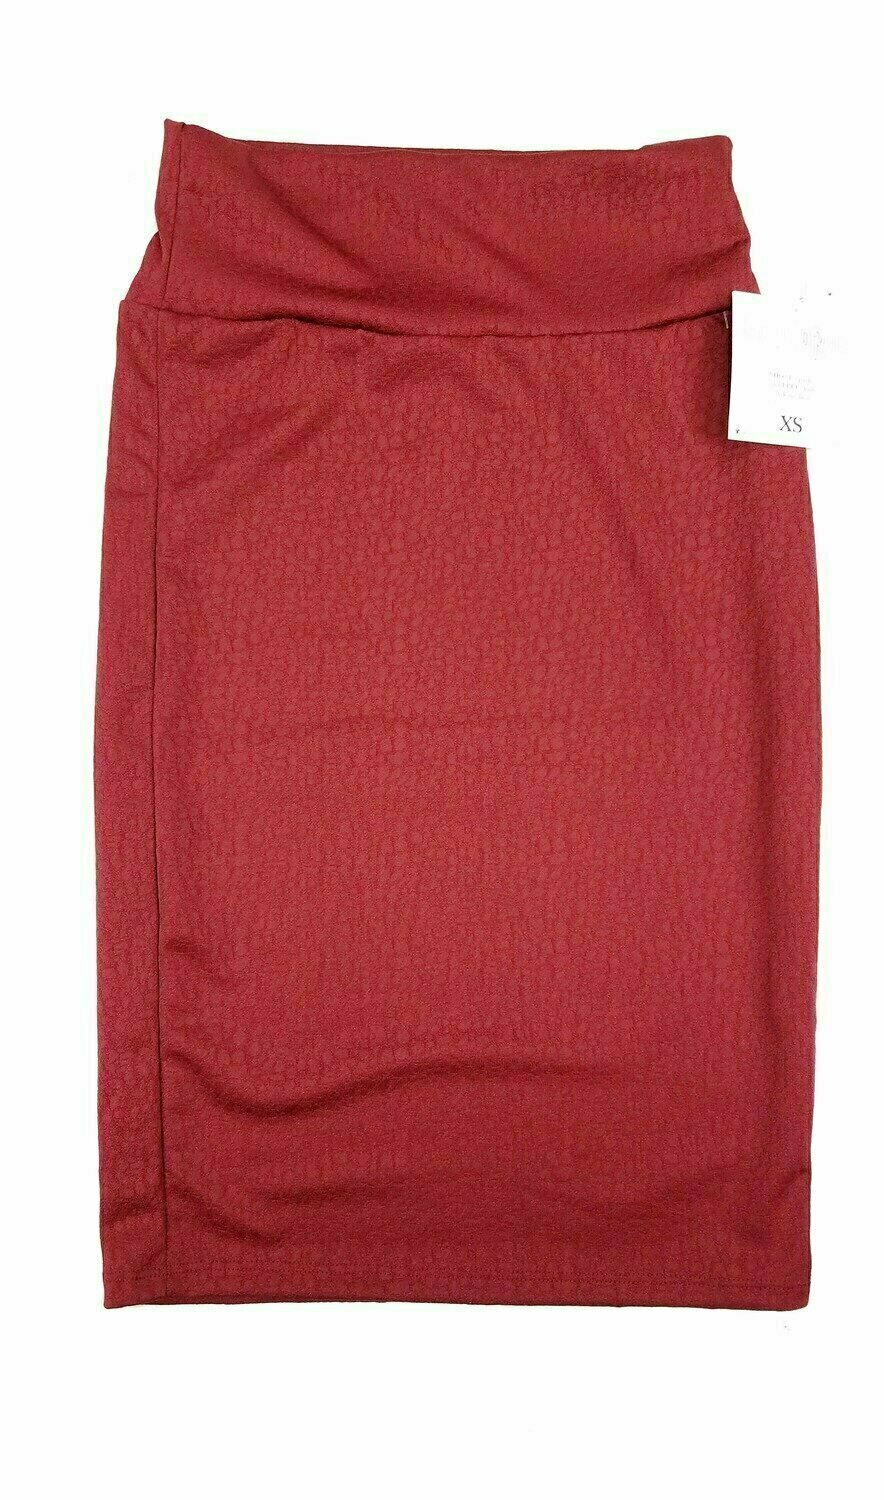 LuLaRoe Cassie b X-Small XS Embossed Faux Alligator Skin Red Womens Knee Length Pencil Skirt fits sizes 2-4 XS-51